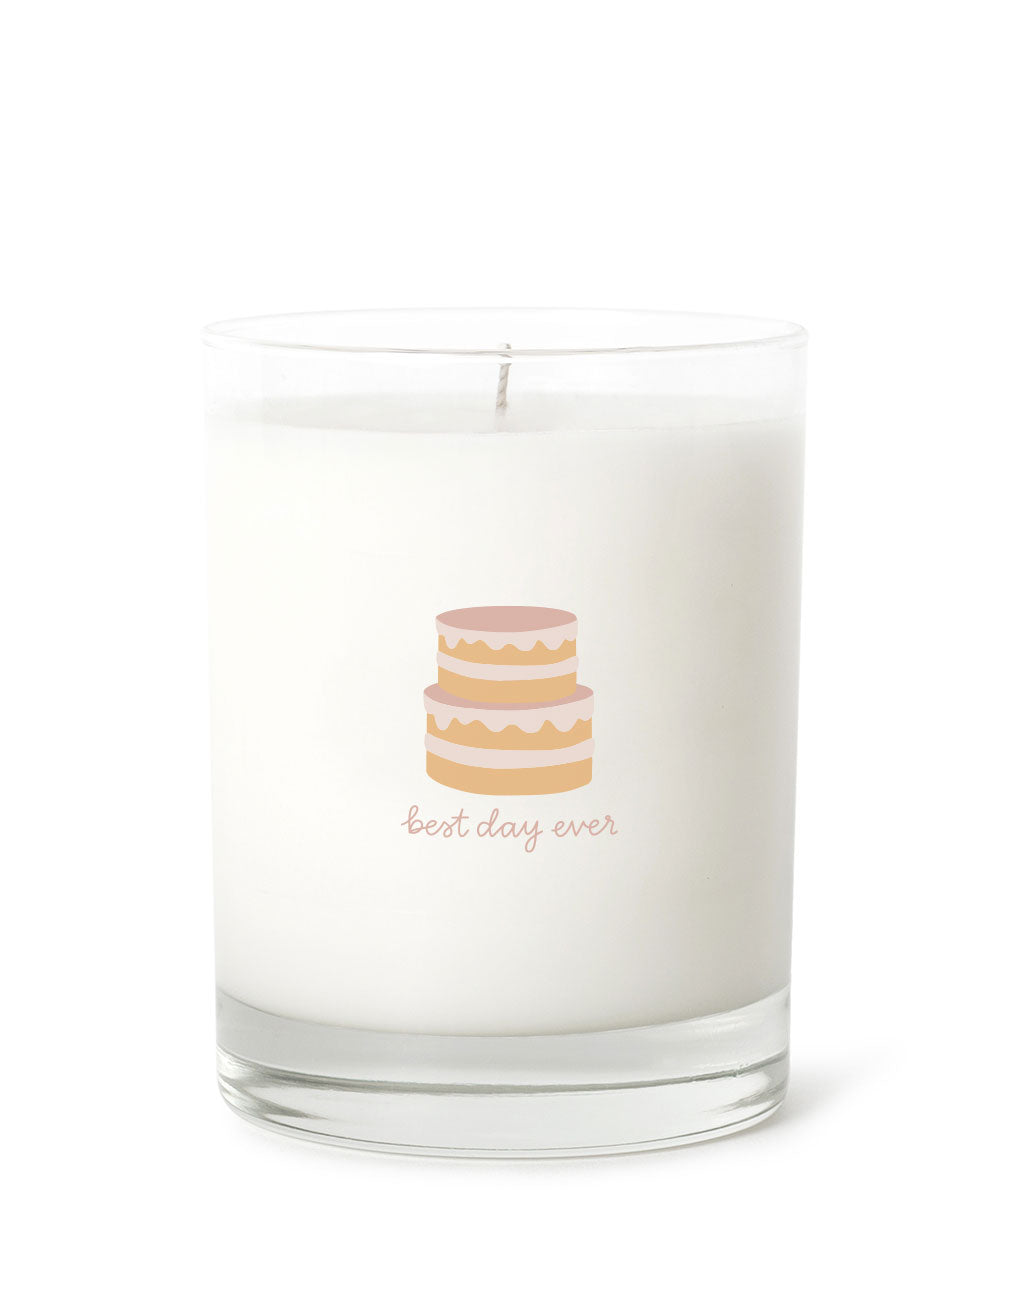 Candle - Best Day Ever (Vanilla Cake)